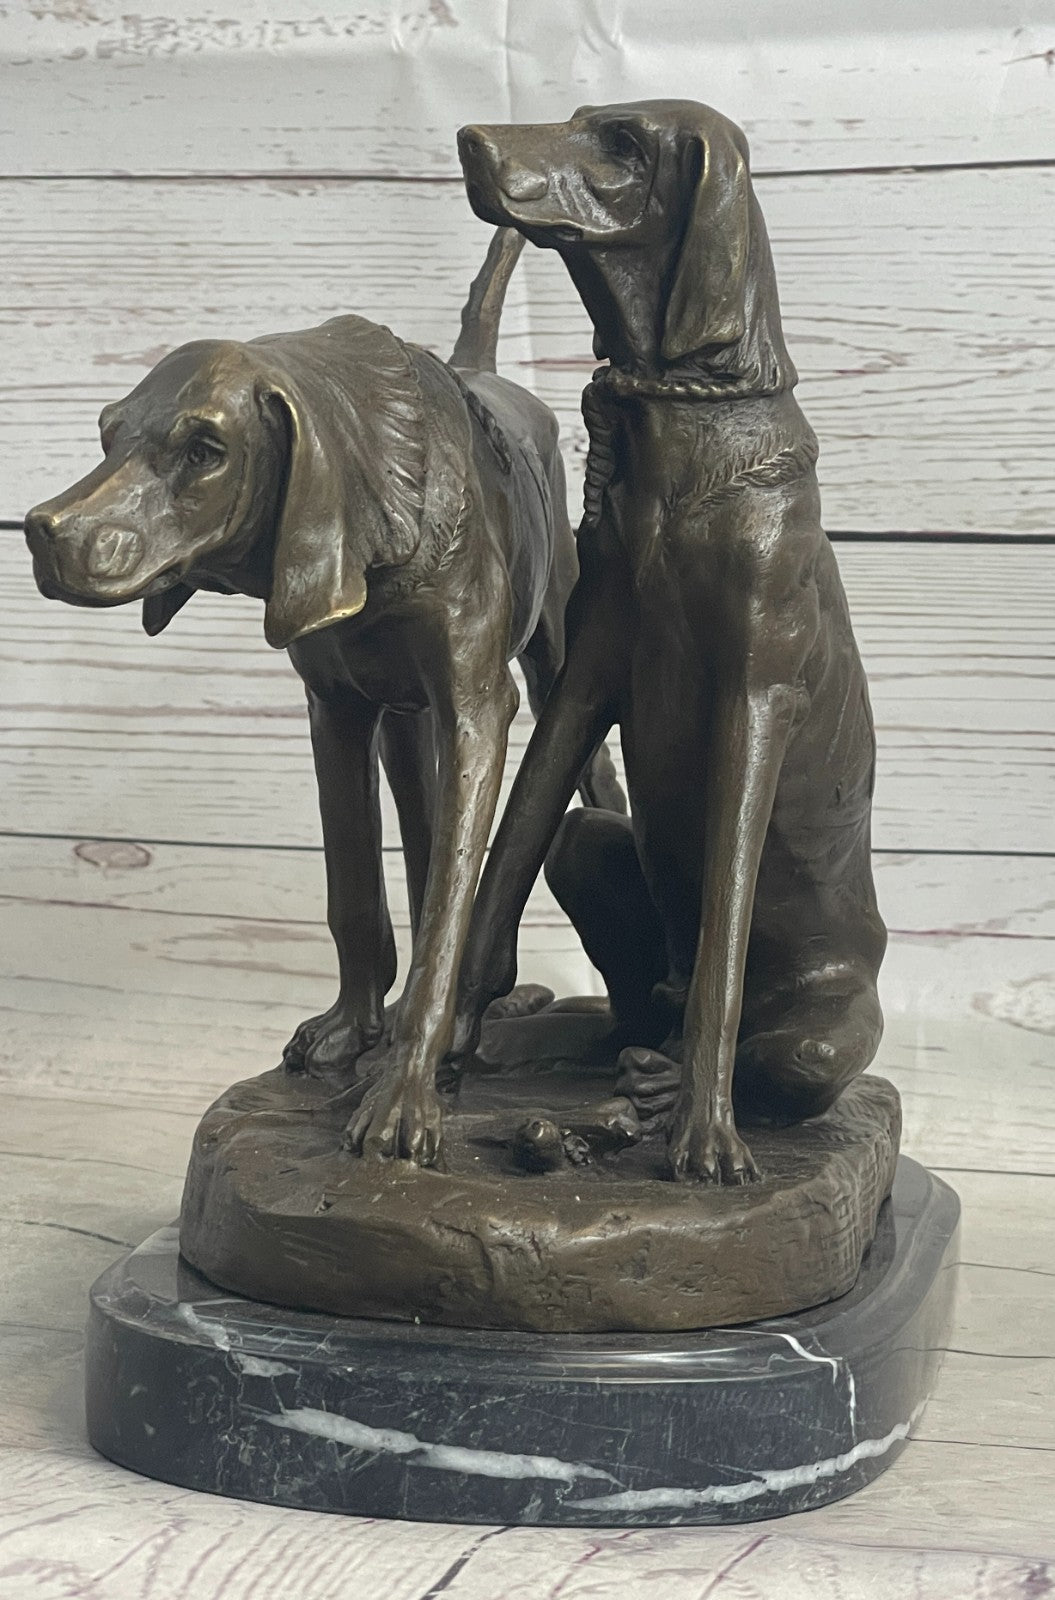 Handcrafted bronze sculpture SALE Dogs Hunting Signed Hot Cast Figurine Figure